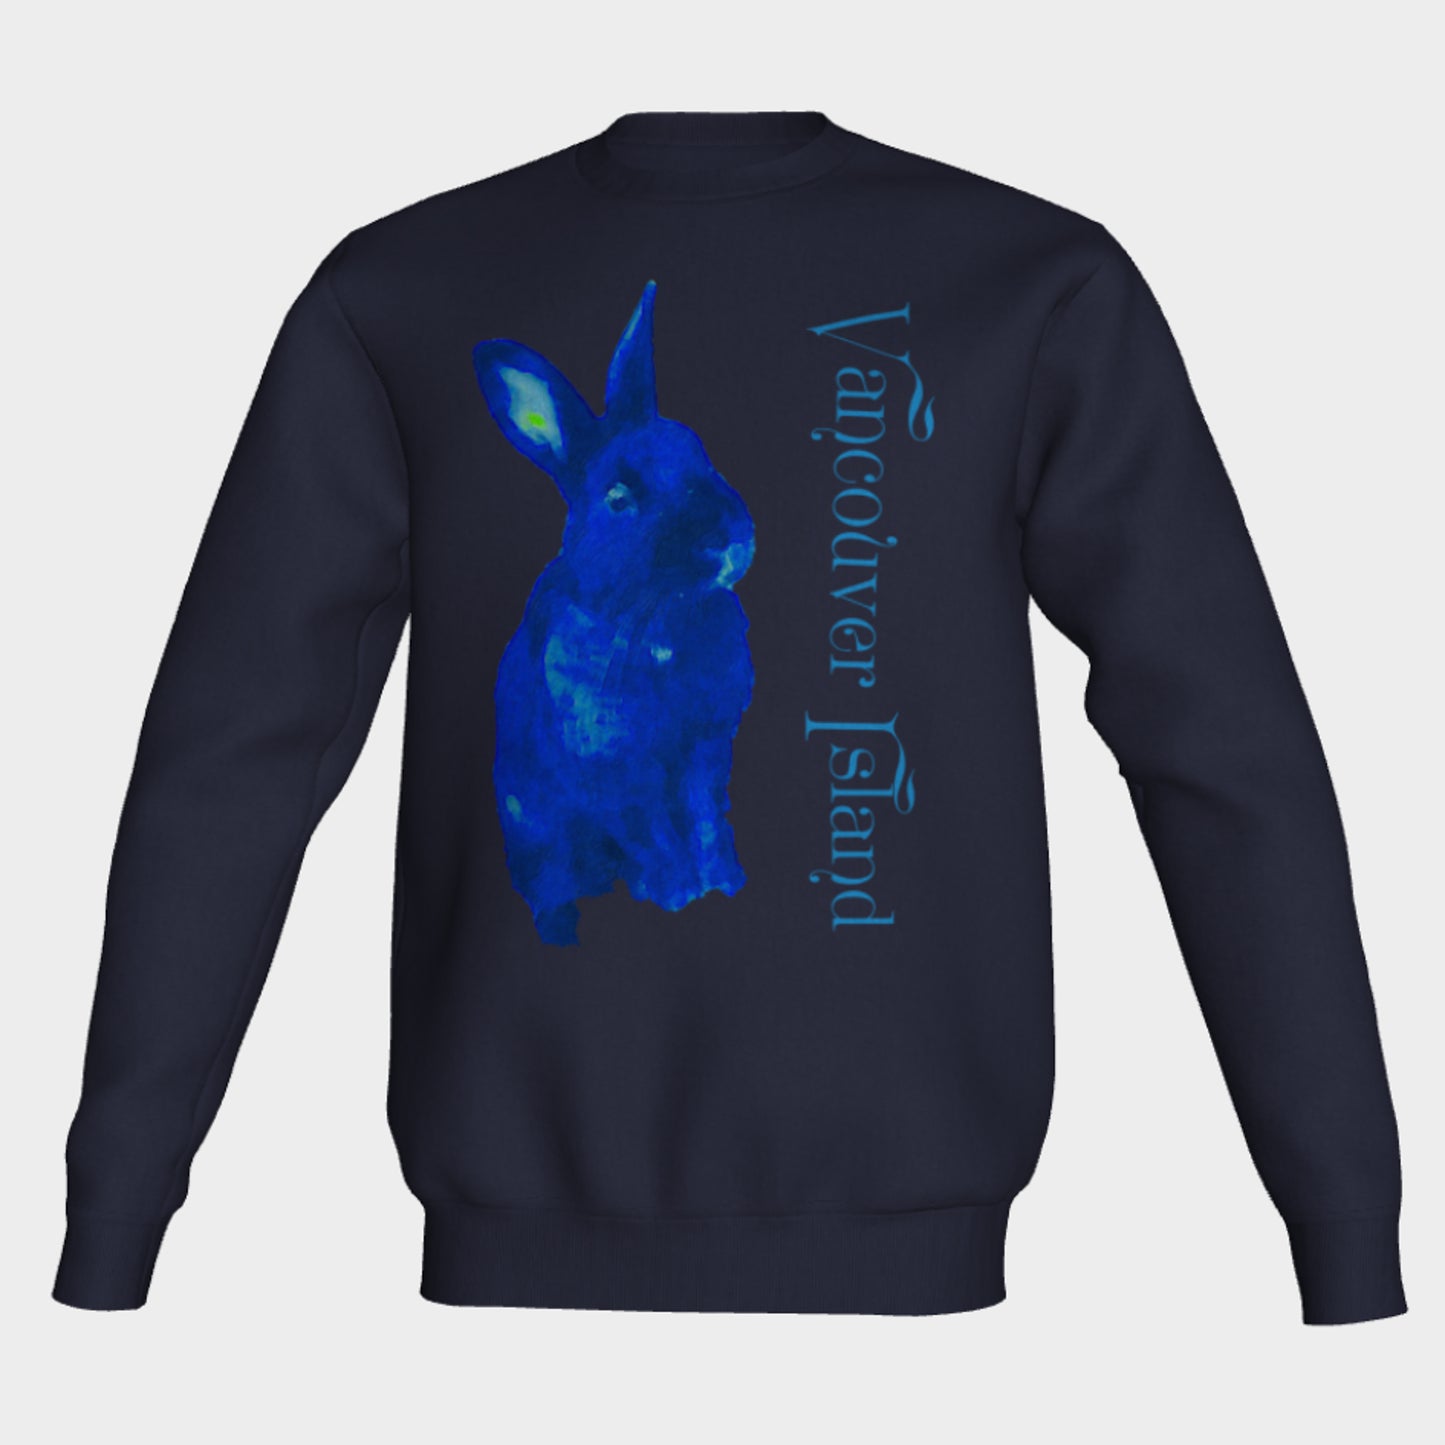 Bunny Love Vancouver Island Unisex Crewneck Sweatshirt What’s better than a super cozy sweatshirt? A super cozy sweatshirt from Van Isle Goddess!  Super cozy unisex sweatshirt for those chilly days.  Excellent for men or women.   Fit is roomy and comfortable. 